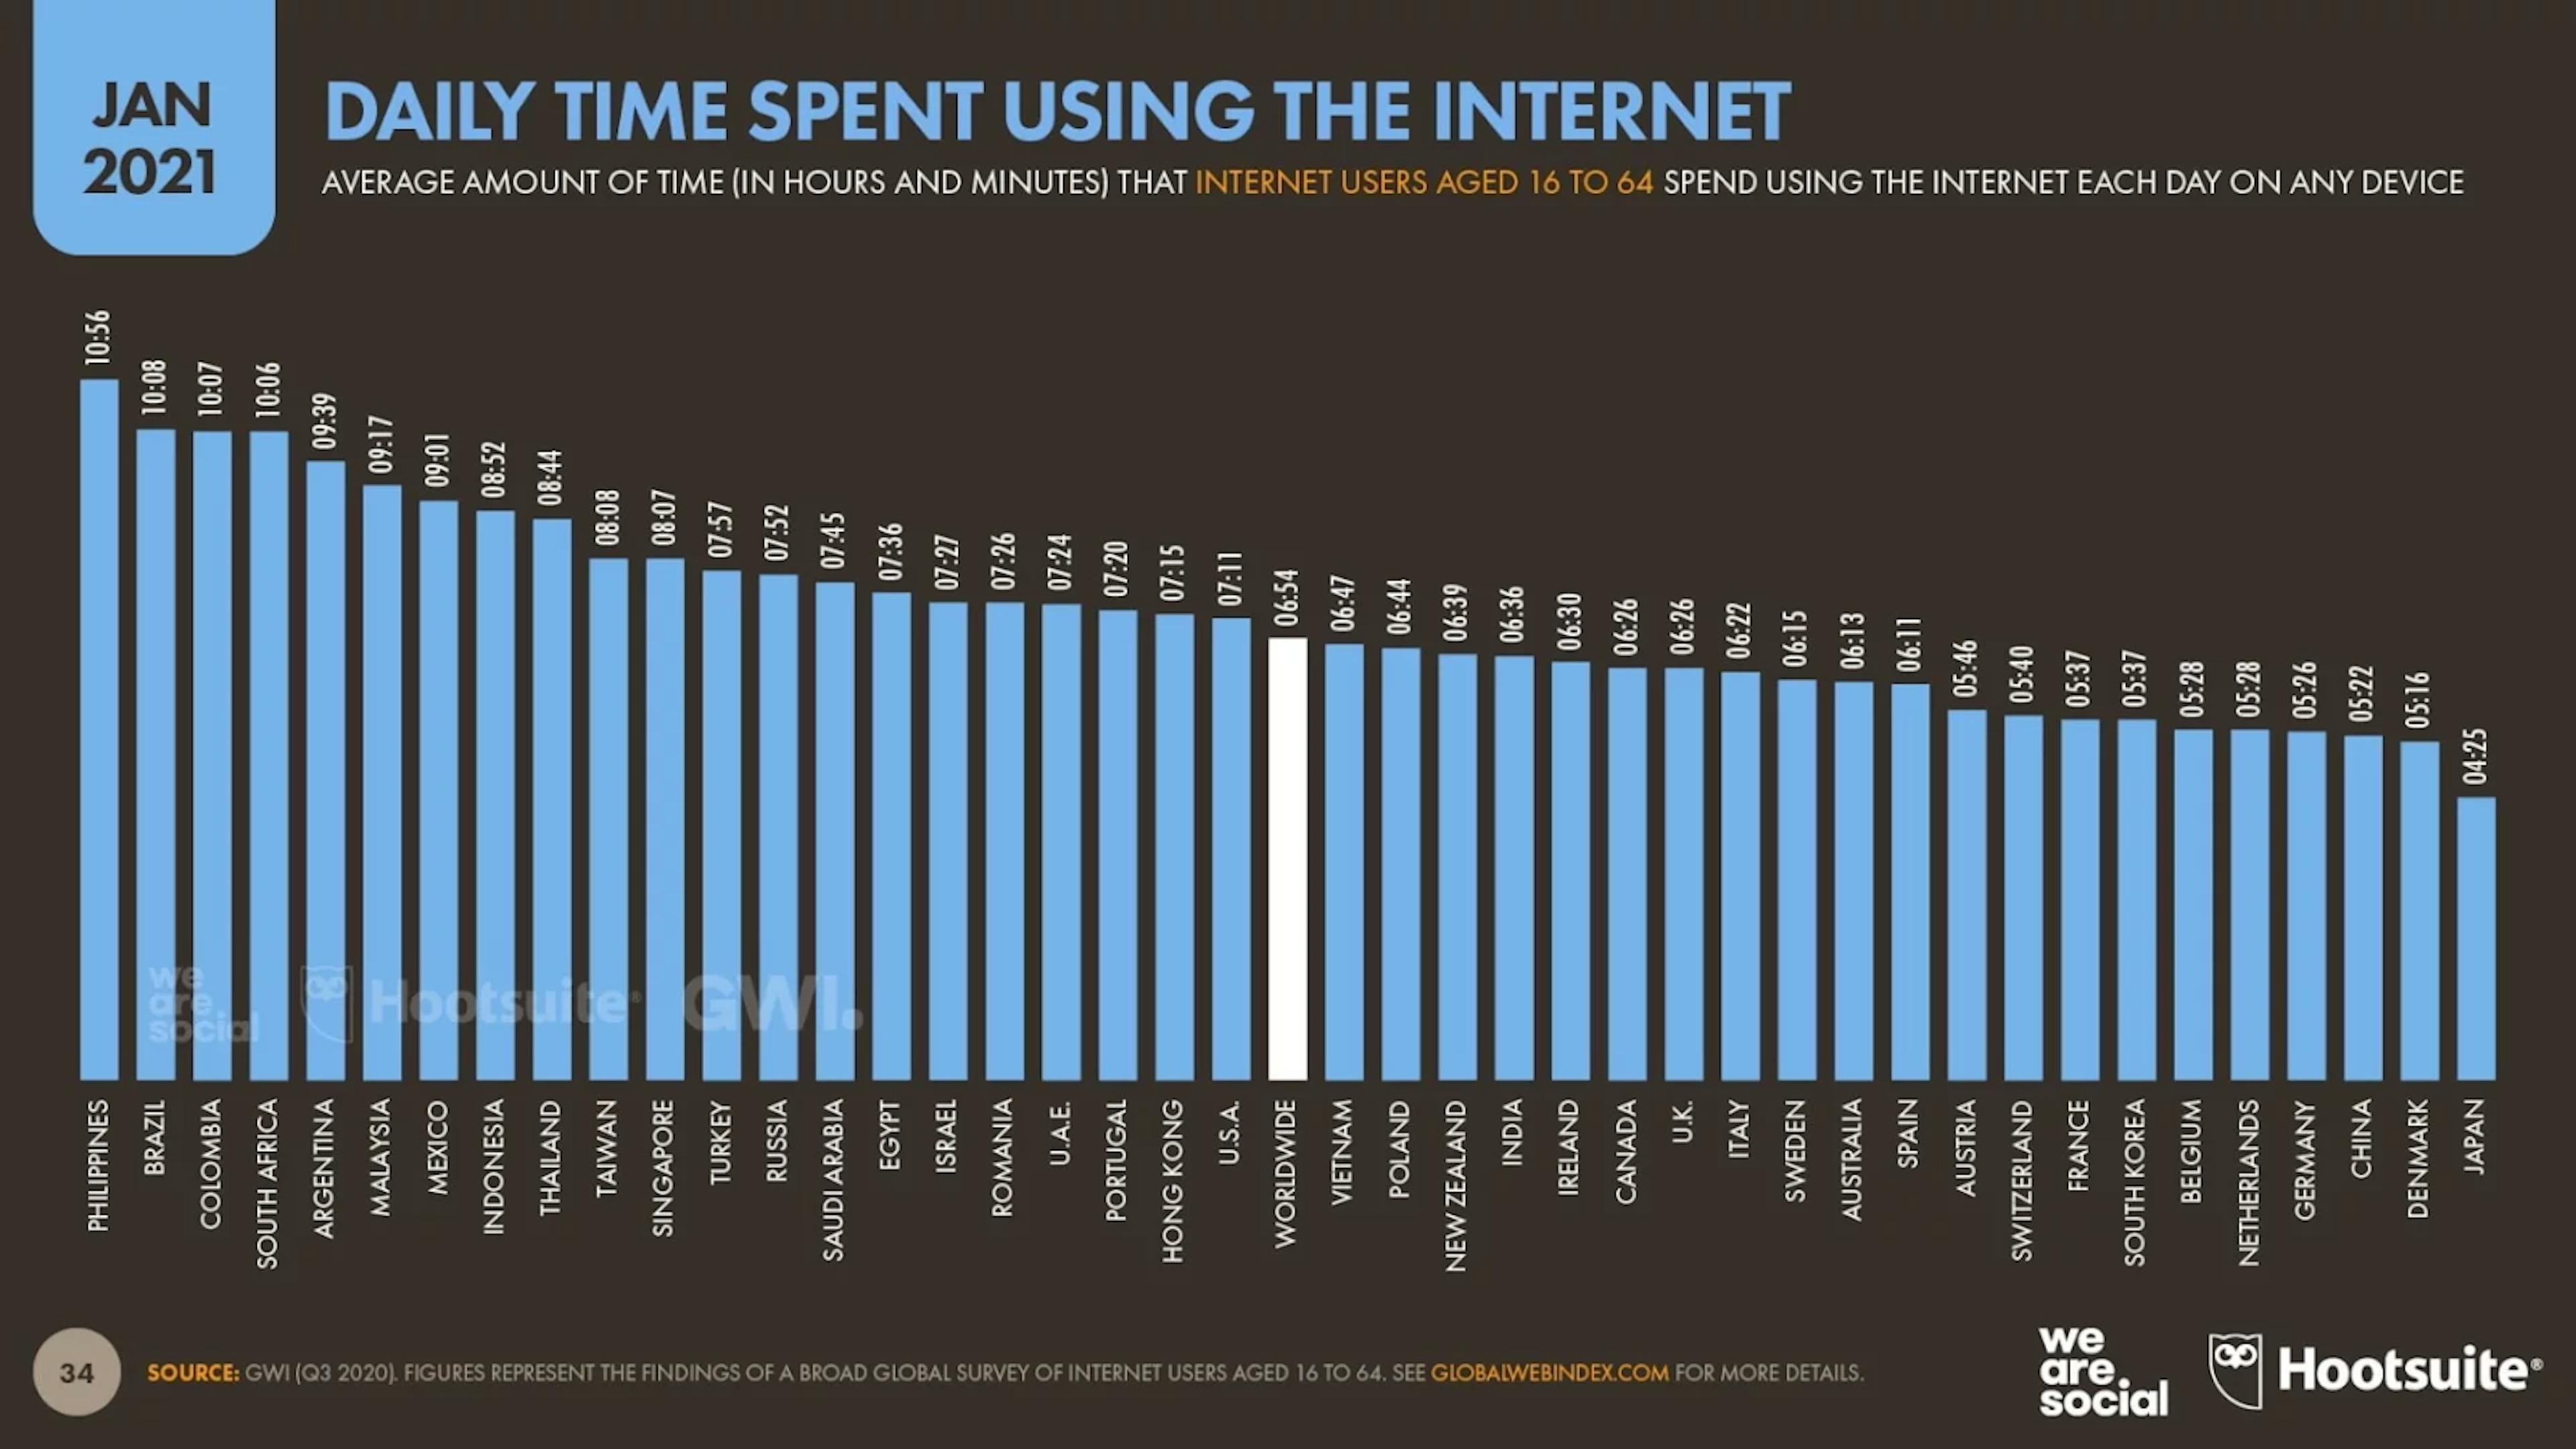 The average user spends almost 7 hours a day online from all devices, which is more than 48 hours a week, 2 full days out of 7. Approximately 42% of our waking hours are spent online.